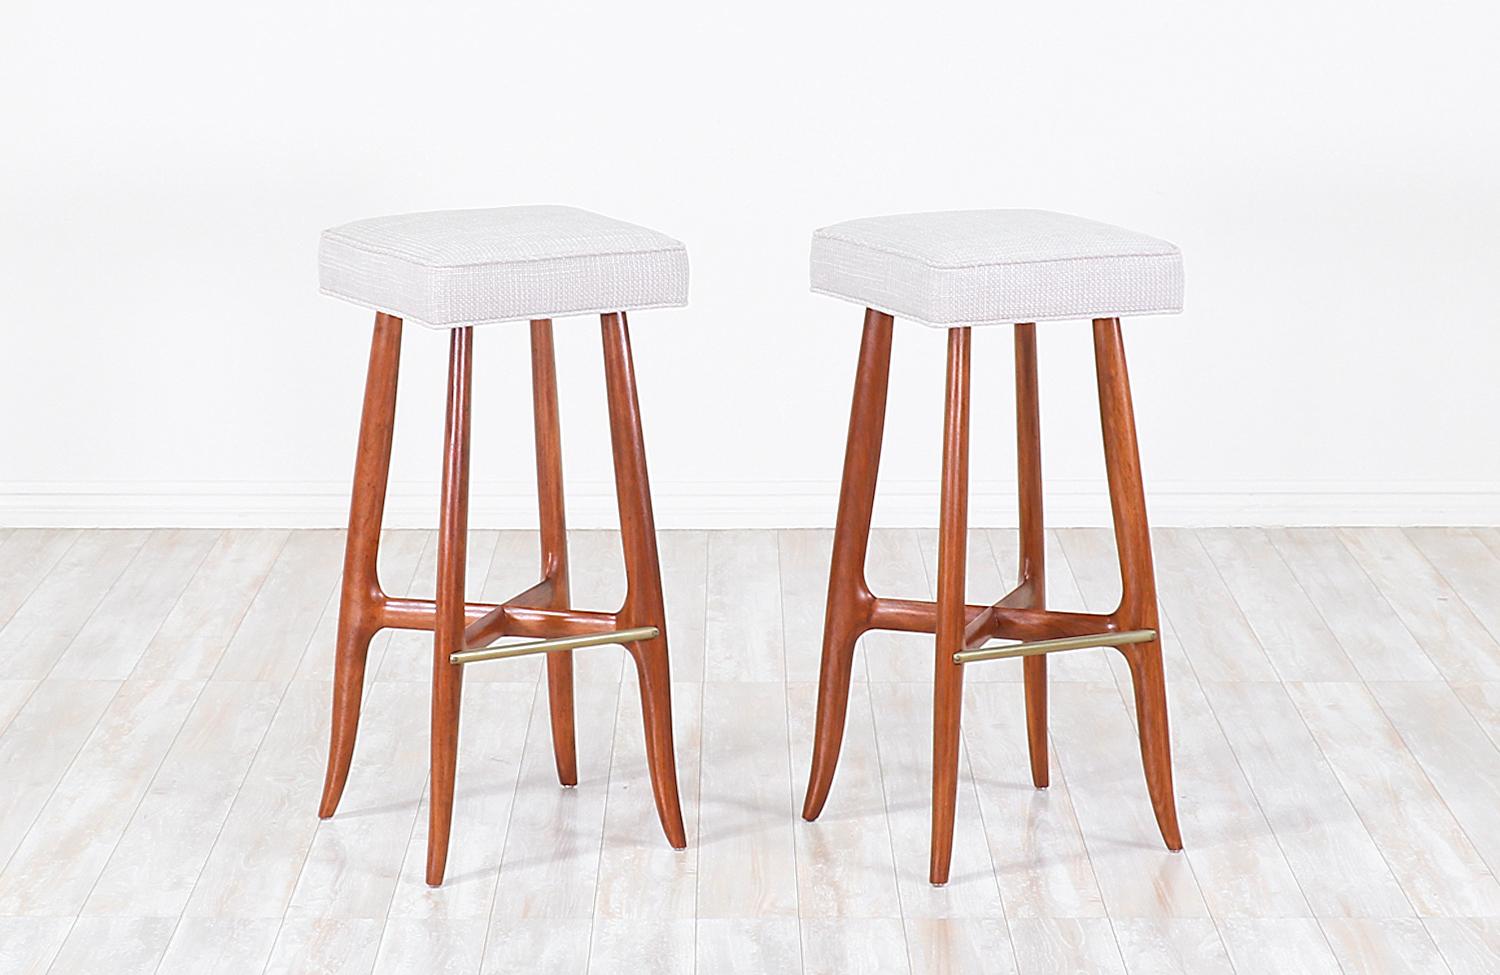 Pair of Mid-Century Modern bar stools designed and manufactured in the United States, circa 1960s. This Minimalist design features a walnut wood base with sculpted feet that flare out at the bottom, supporting wooden stretchers in the form of an X.